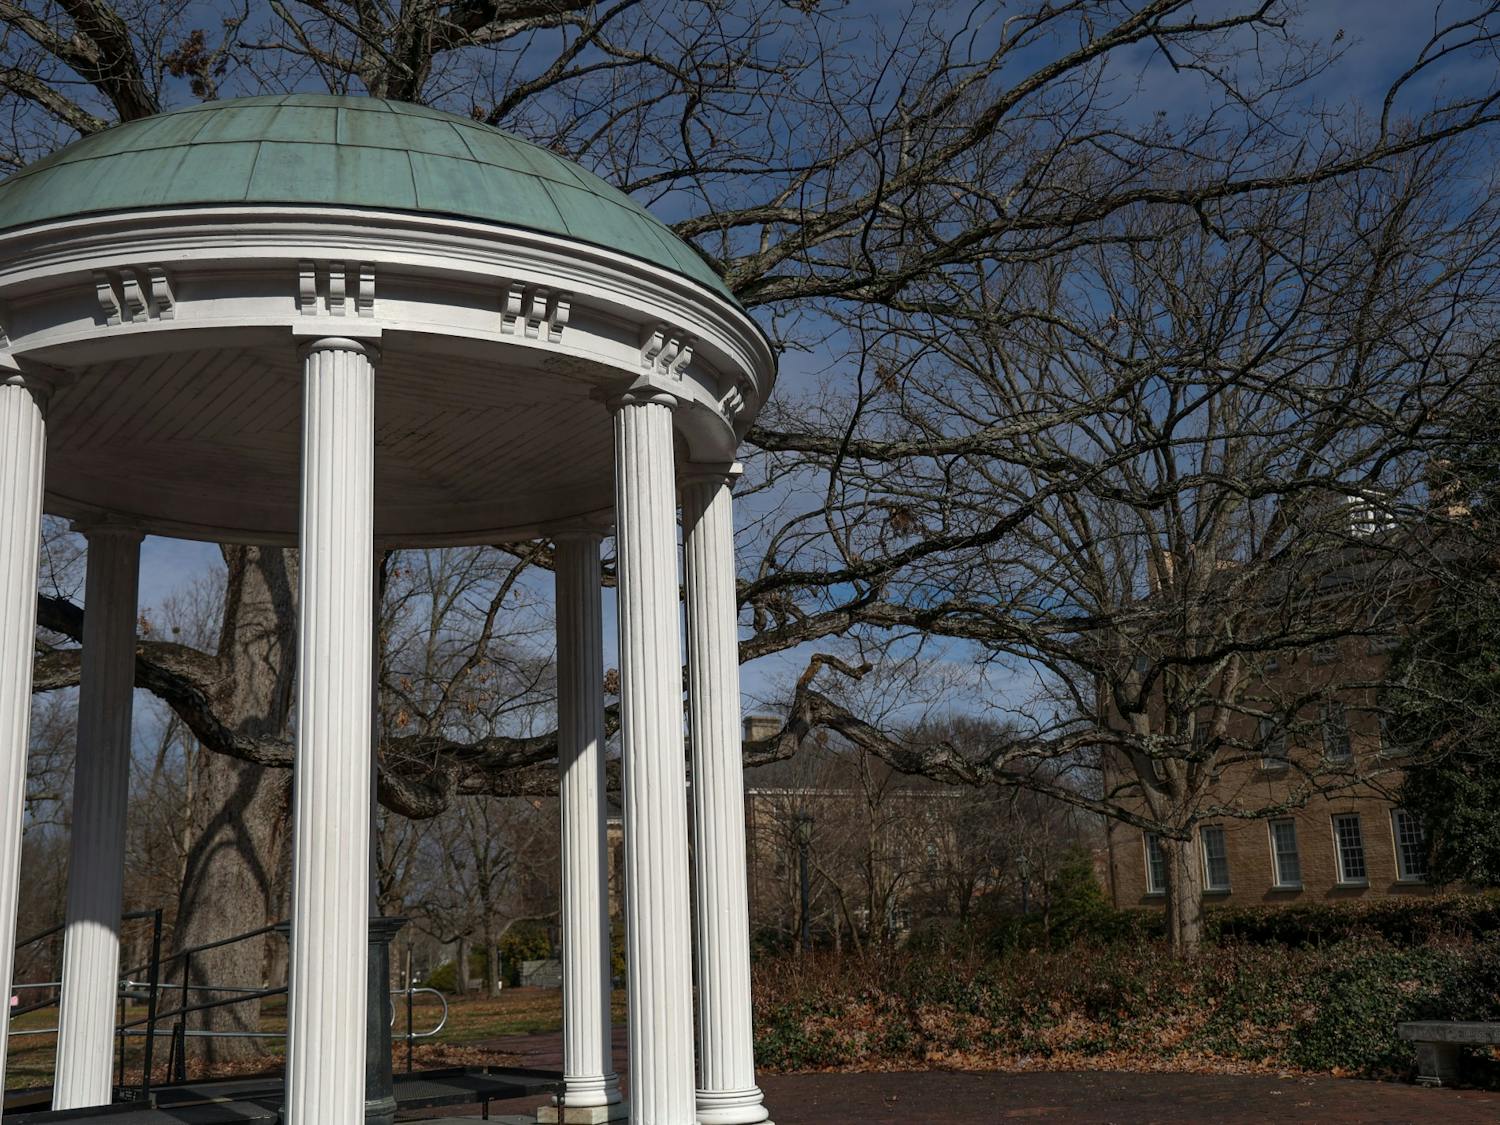 The Old Well is pictured on Monday, Jan. 30, 2023, in Chapel Hill.